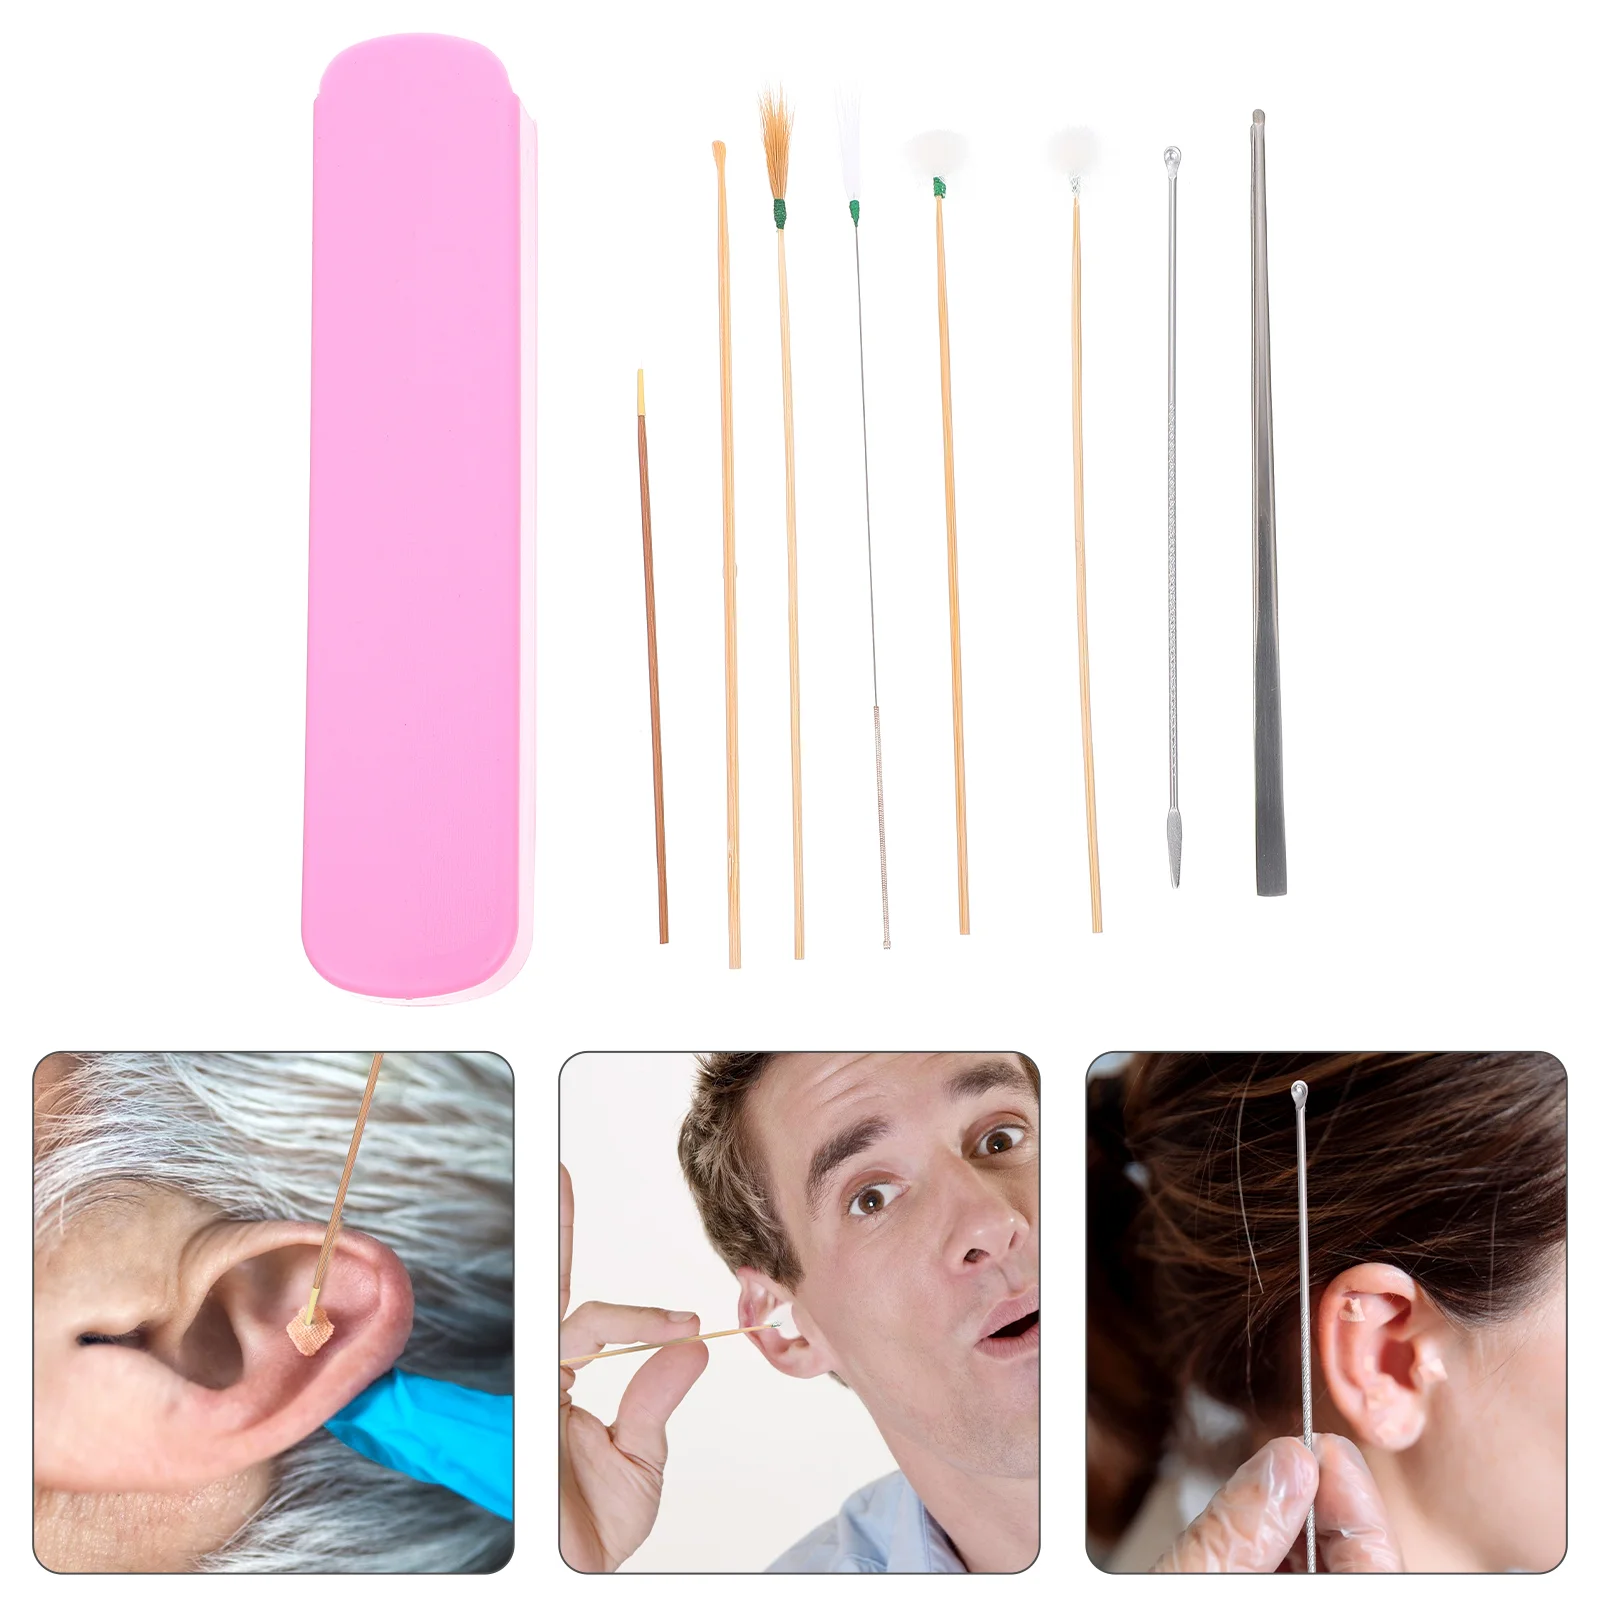 

8 Pcs Ear Picking Tool Earwax Cleaning Tools Removal Kit Spoon Wooden Pickers Durable Spoons